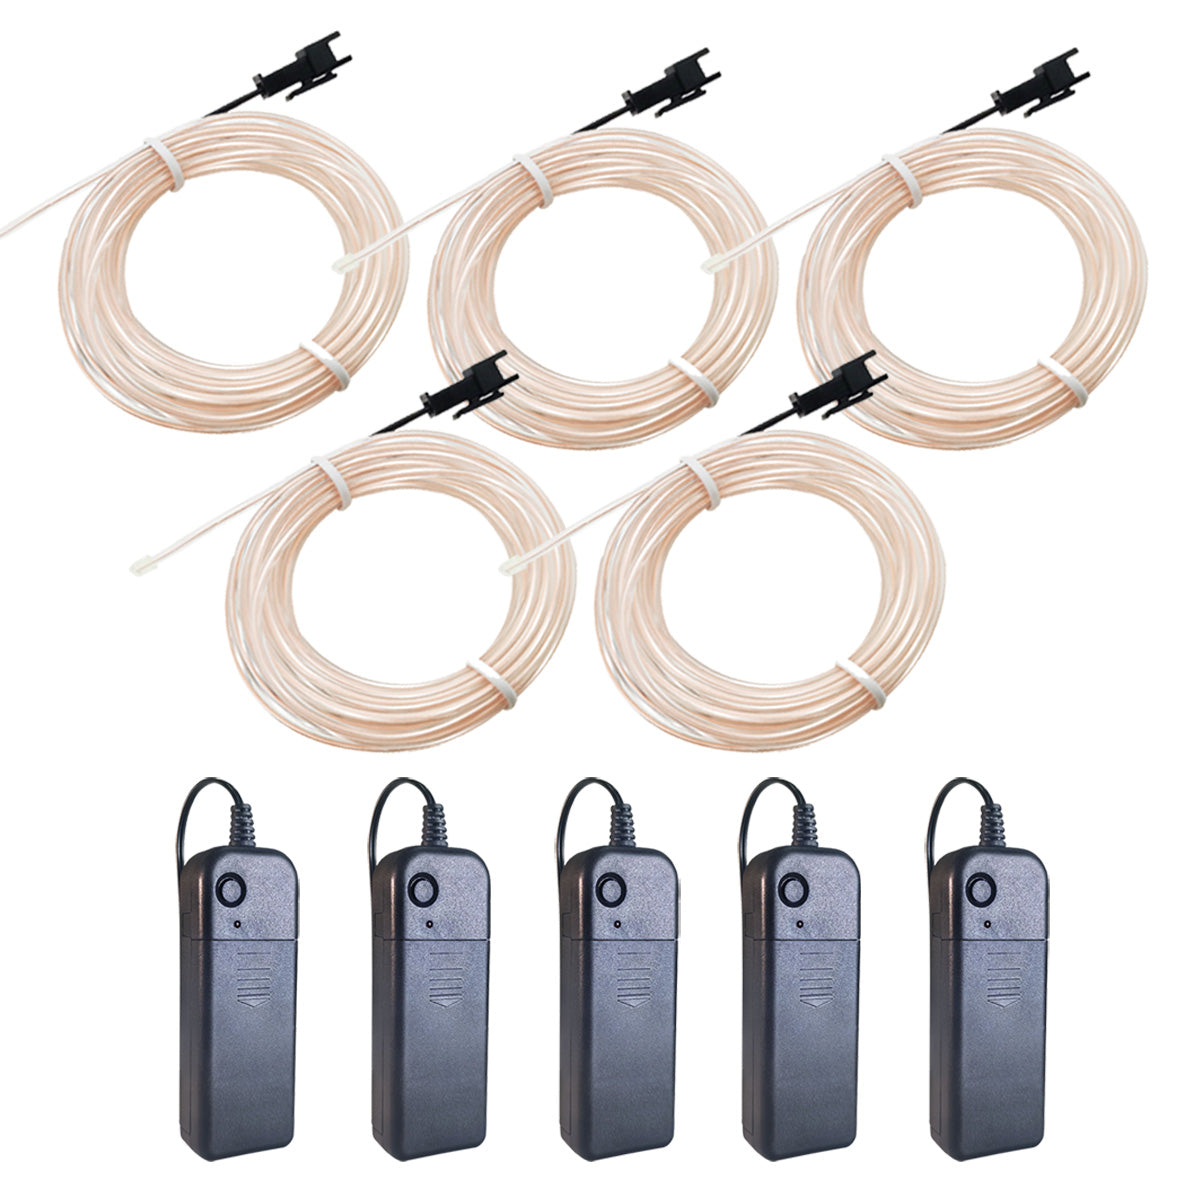 EL Wire Portable 5 Set  (Green, Blue, Red, White, Pink)50% Discount if you use discount  code